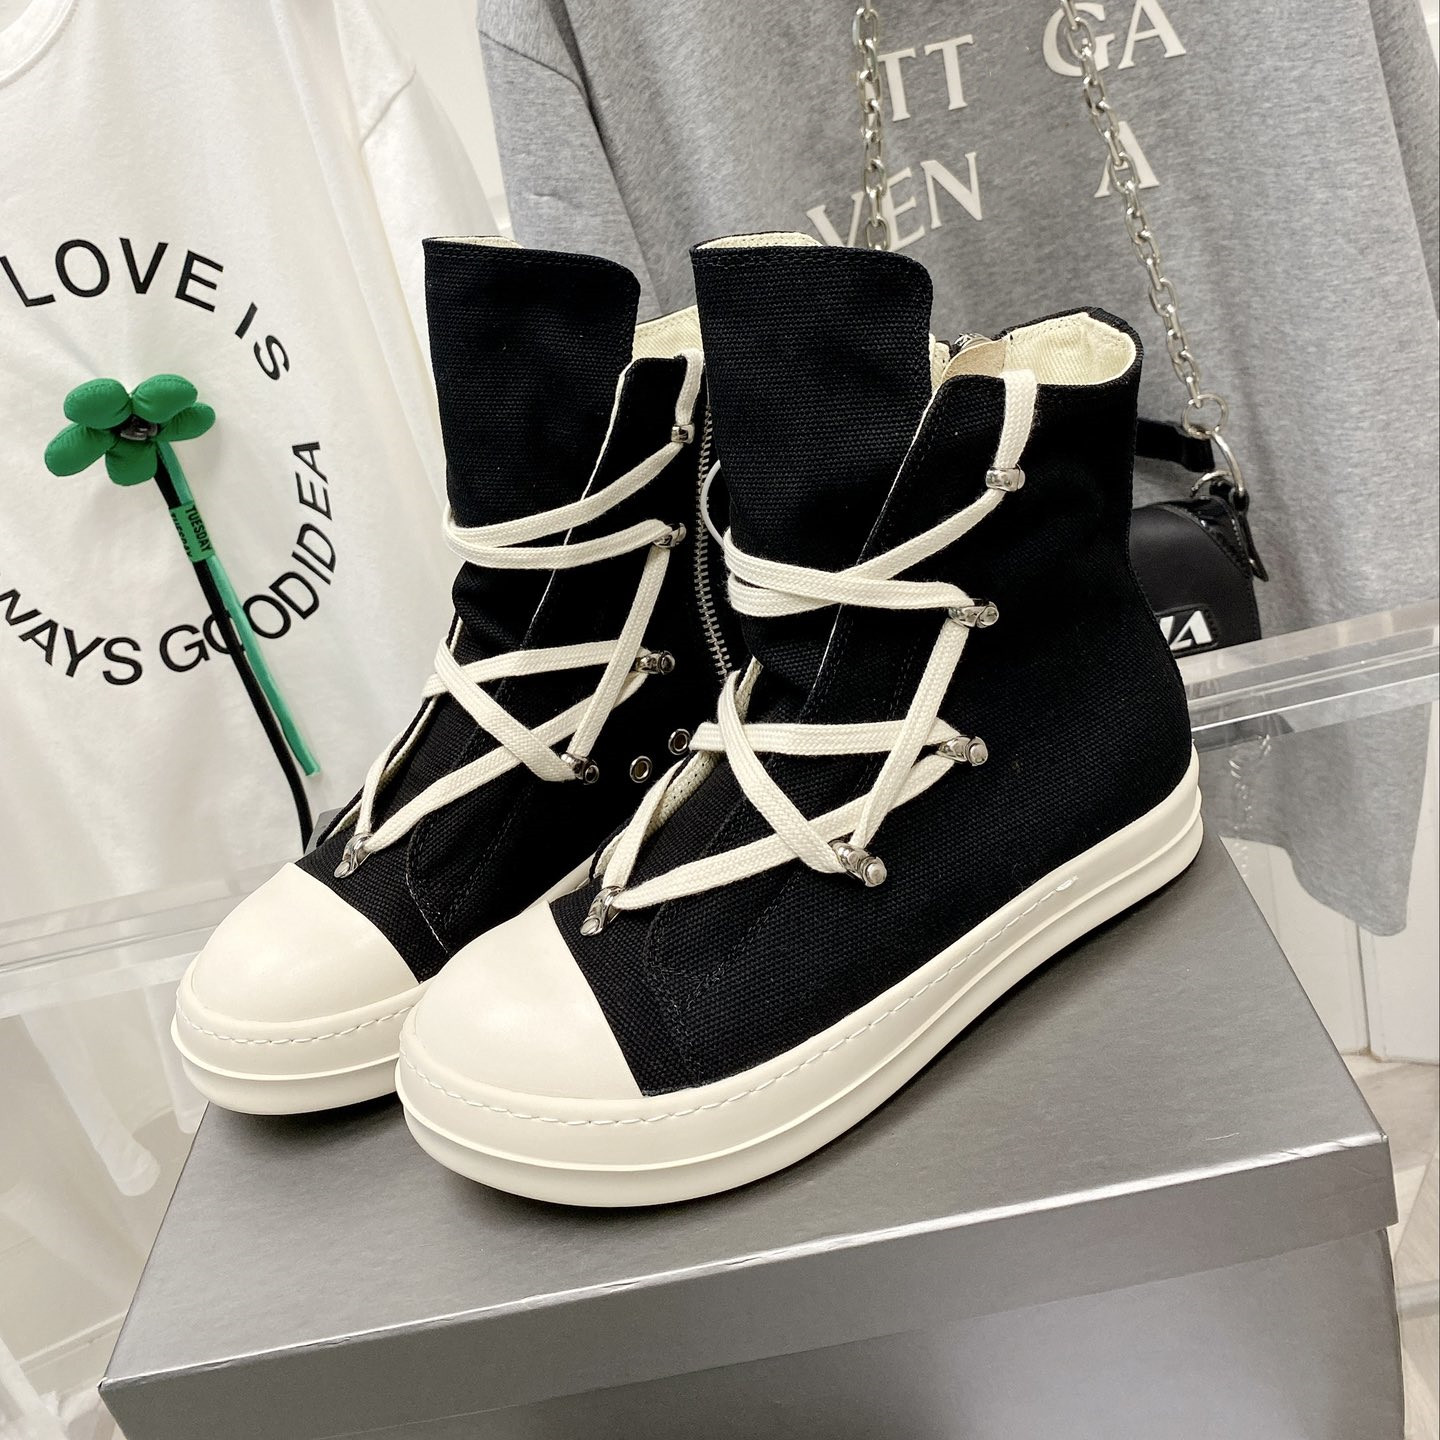 

Designer Canvas Sneakers Retro Shoes rick own shoe Spring Ankle Boots Rick Breathable Women Booties Black White Owen Lace Up High Top Female Board For Men with box